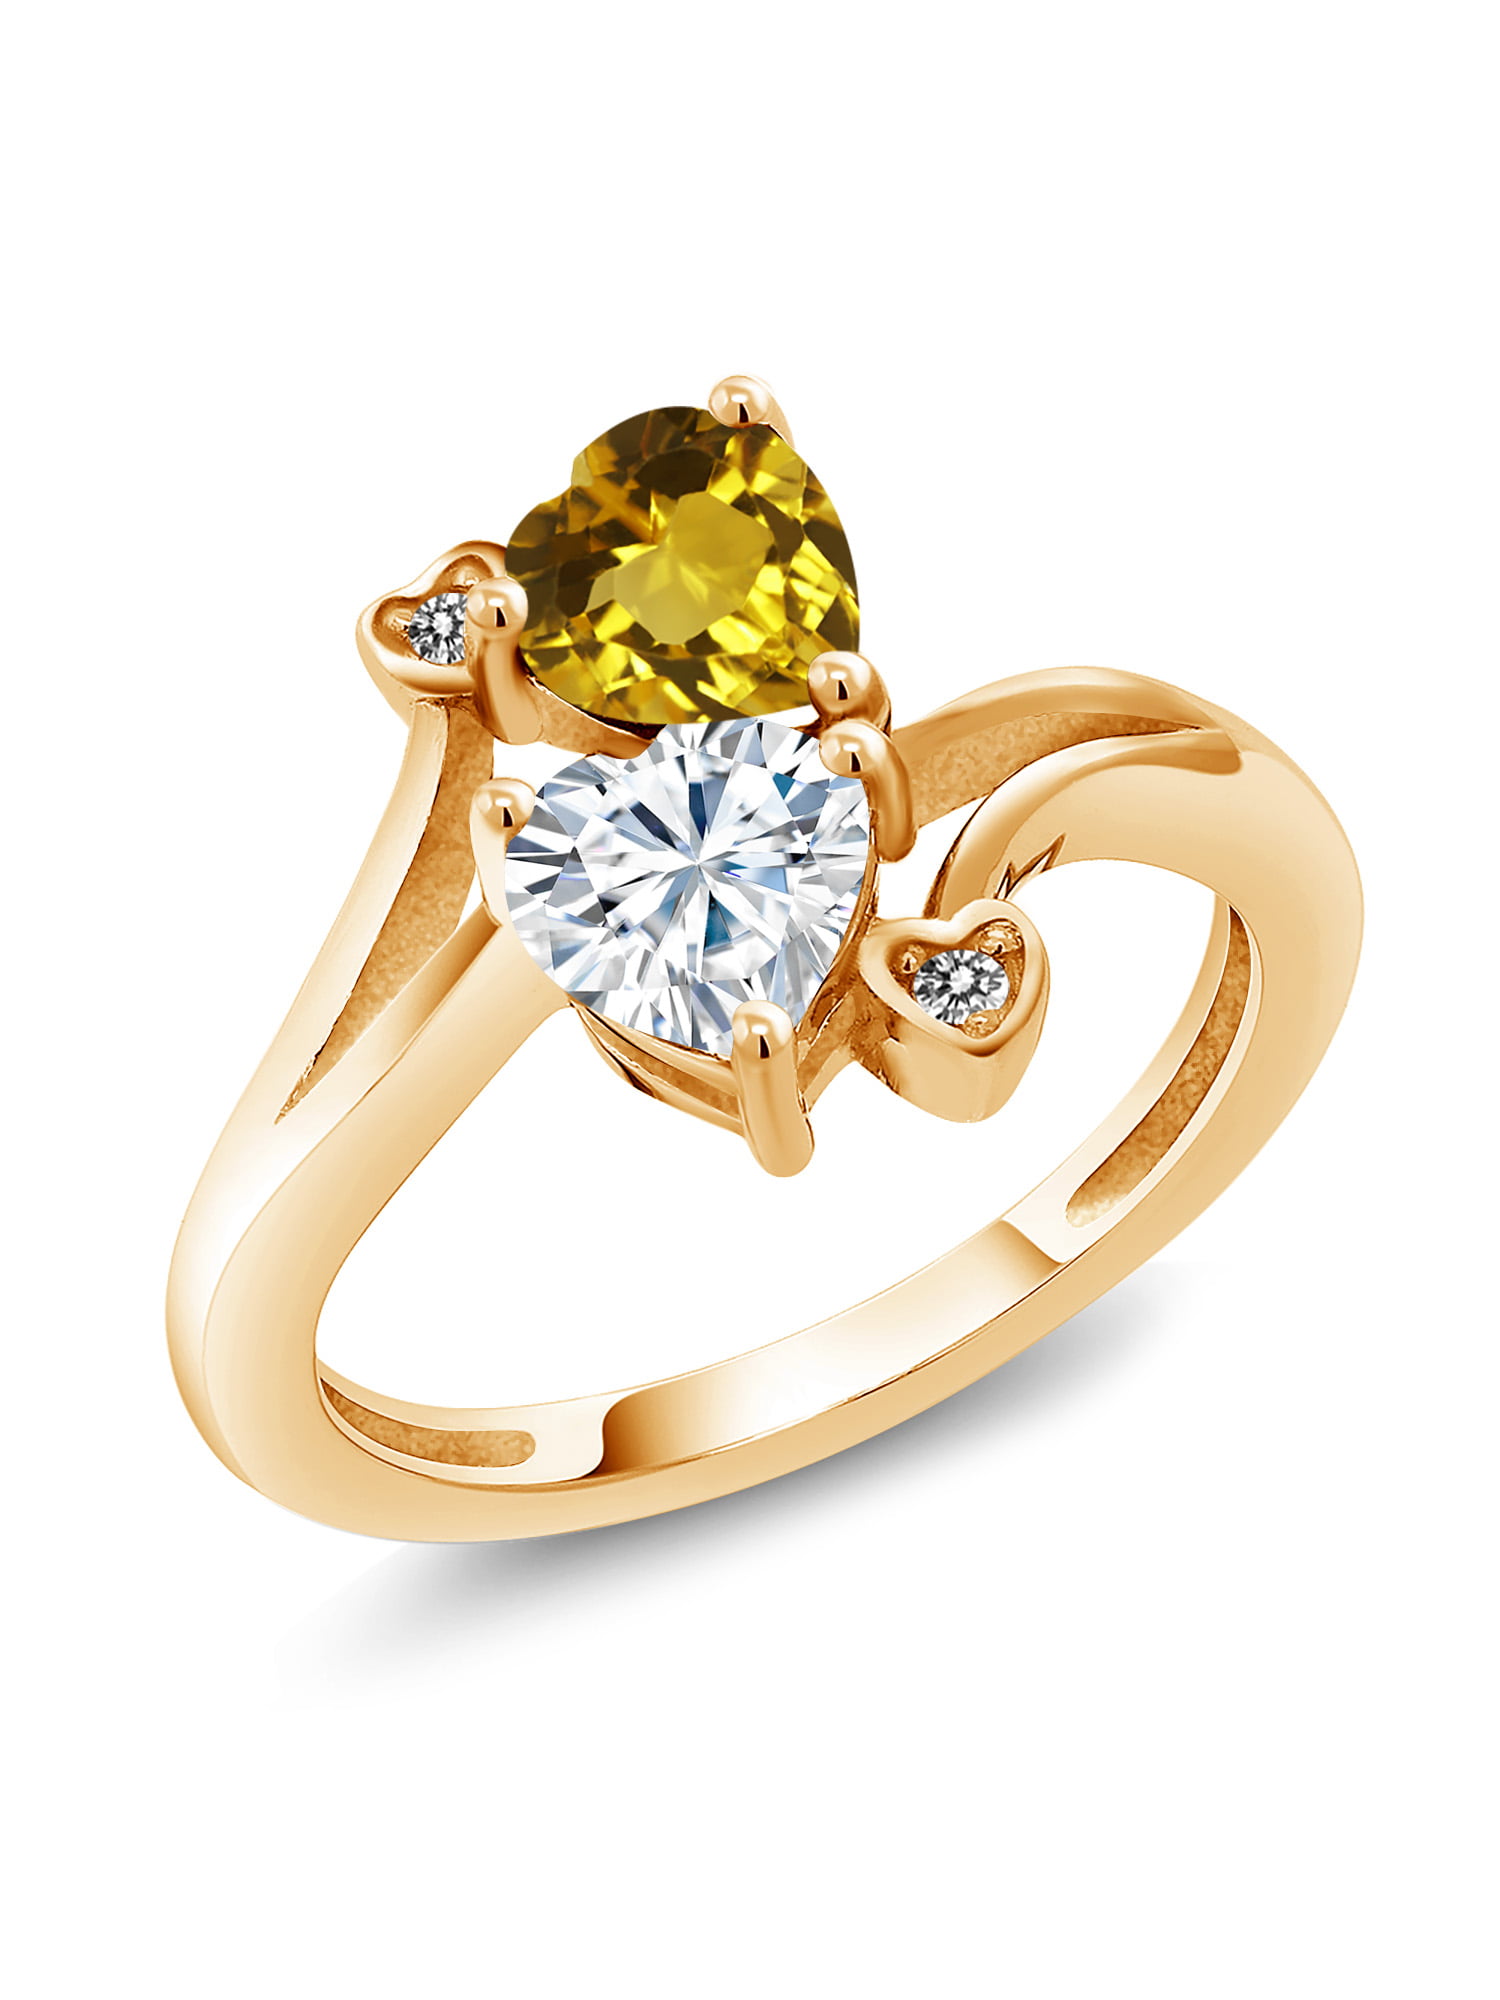 Details about   10k or 14k Yellow Gold Genuine Citrine Peridot and Diamond Accented Ladies Ring 